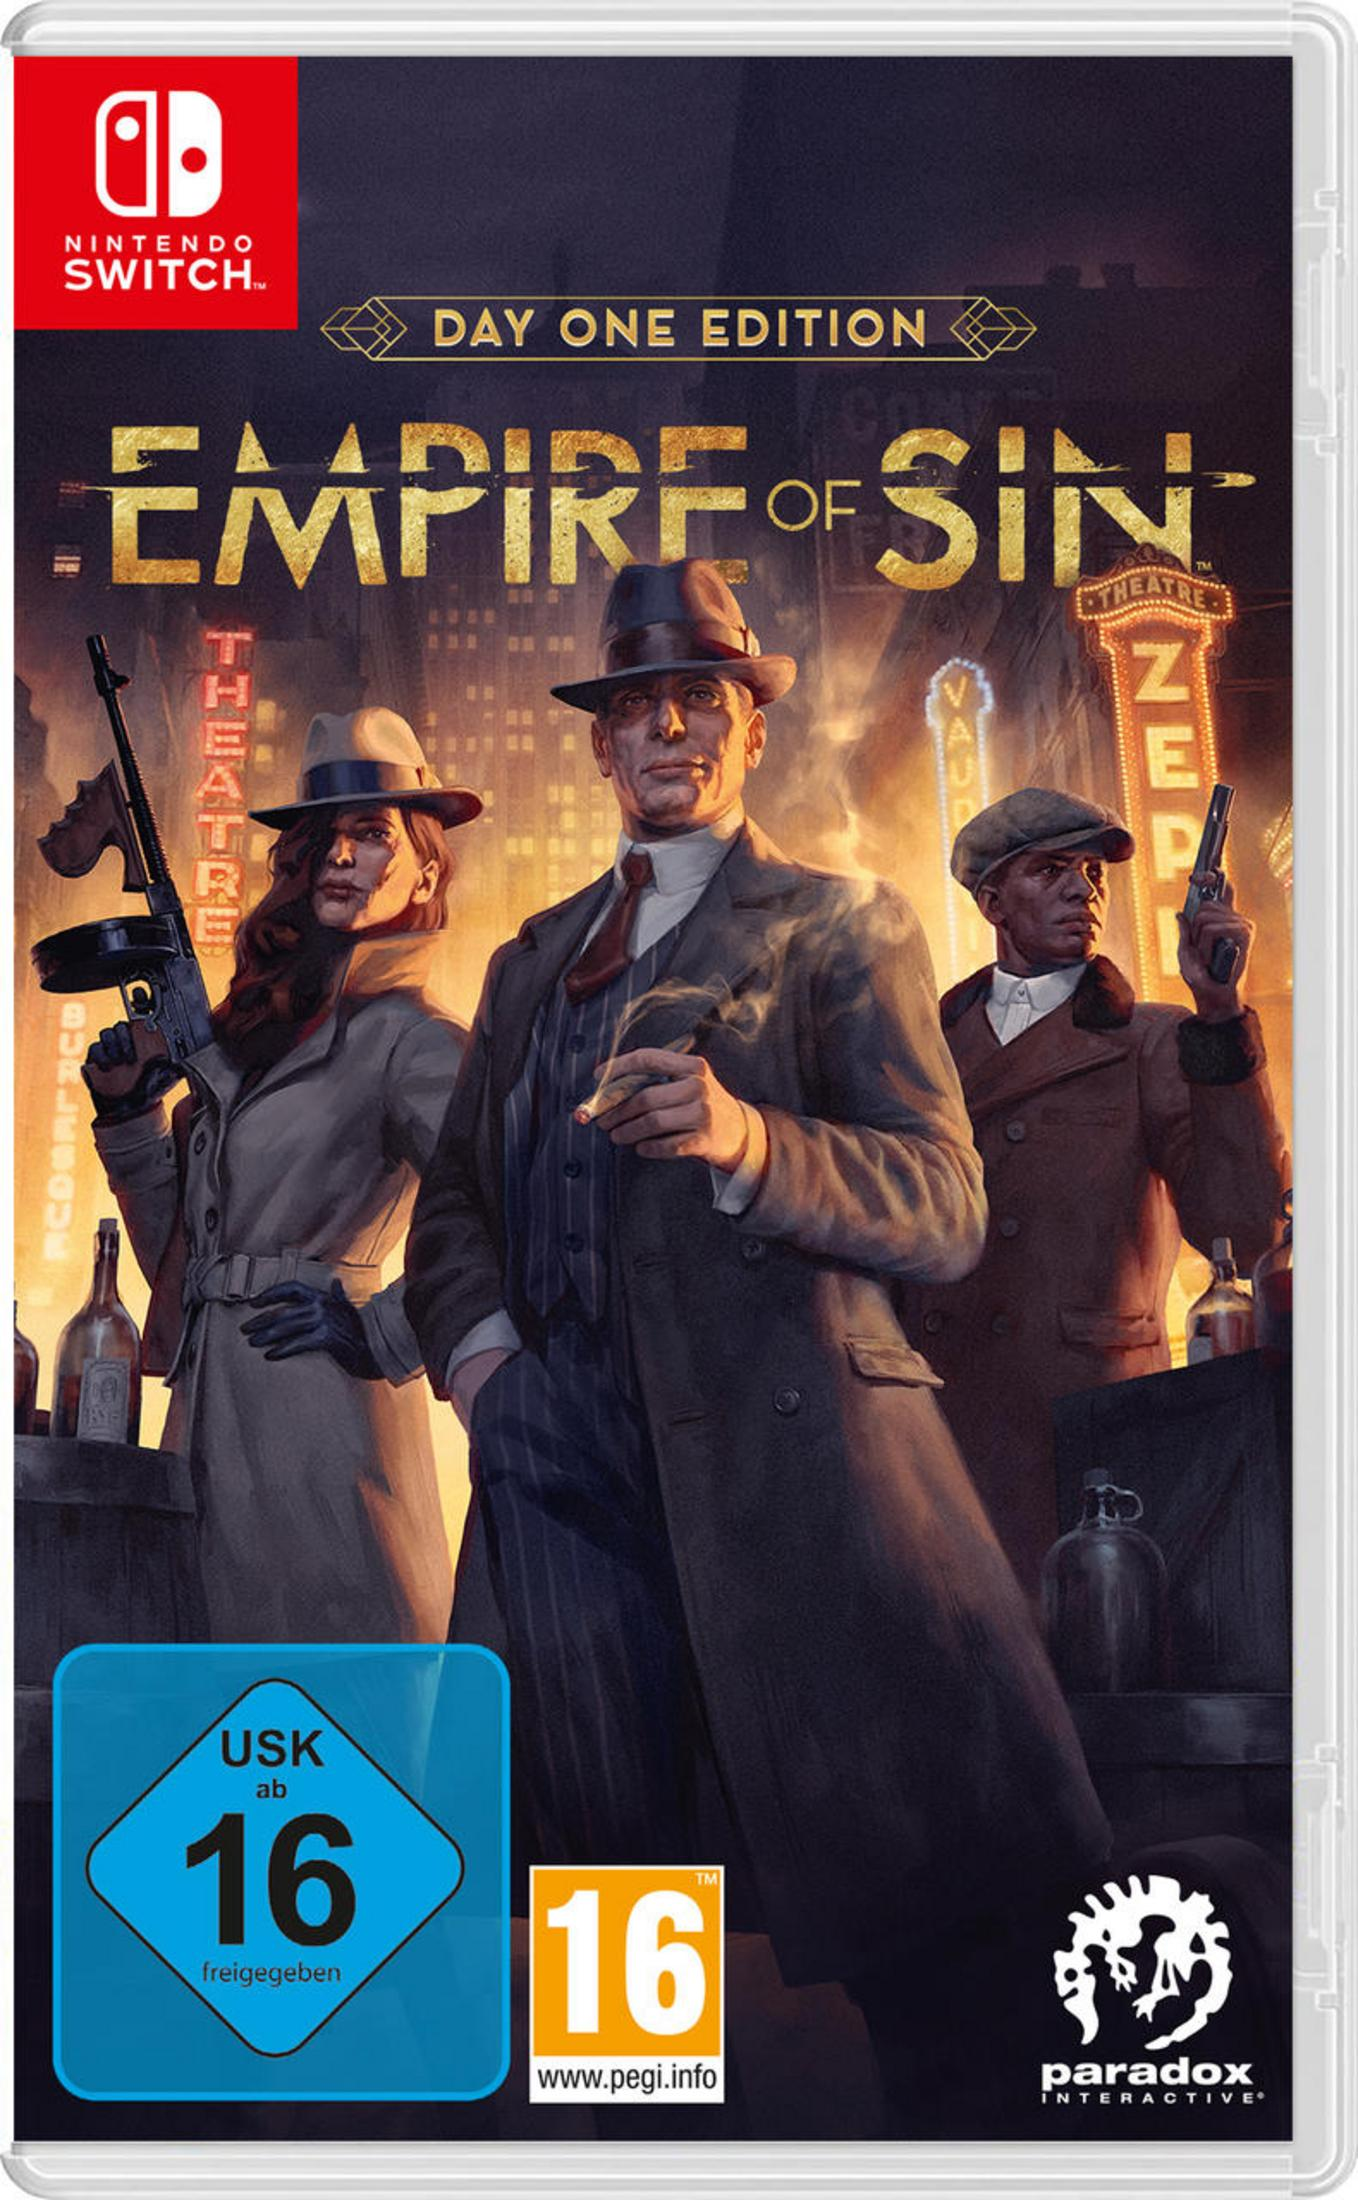 Empire of Switch] Day Edition [Nintendo - One Sin